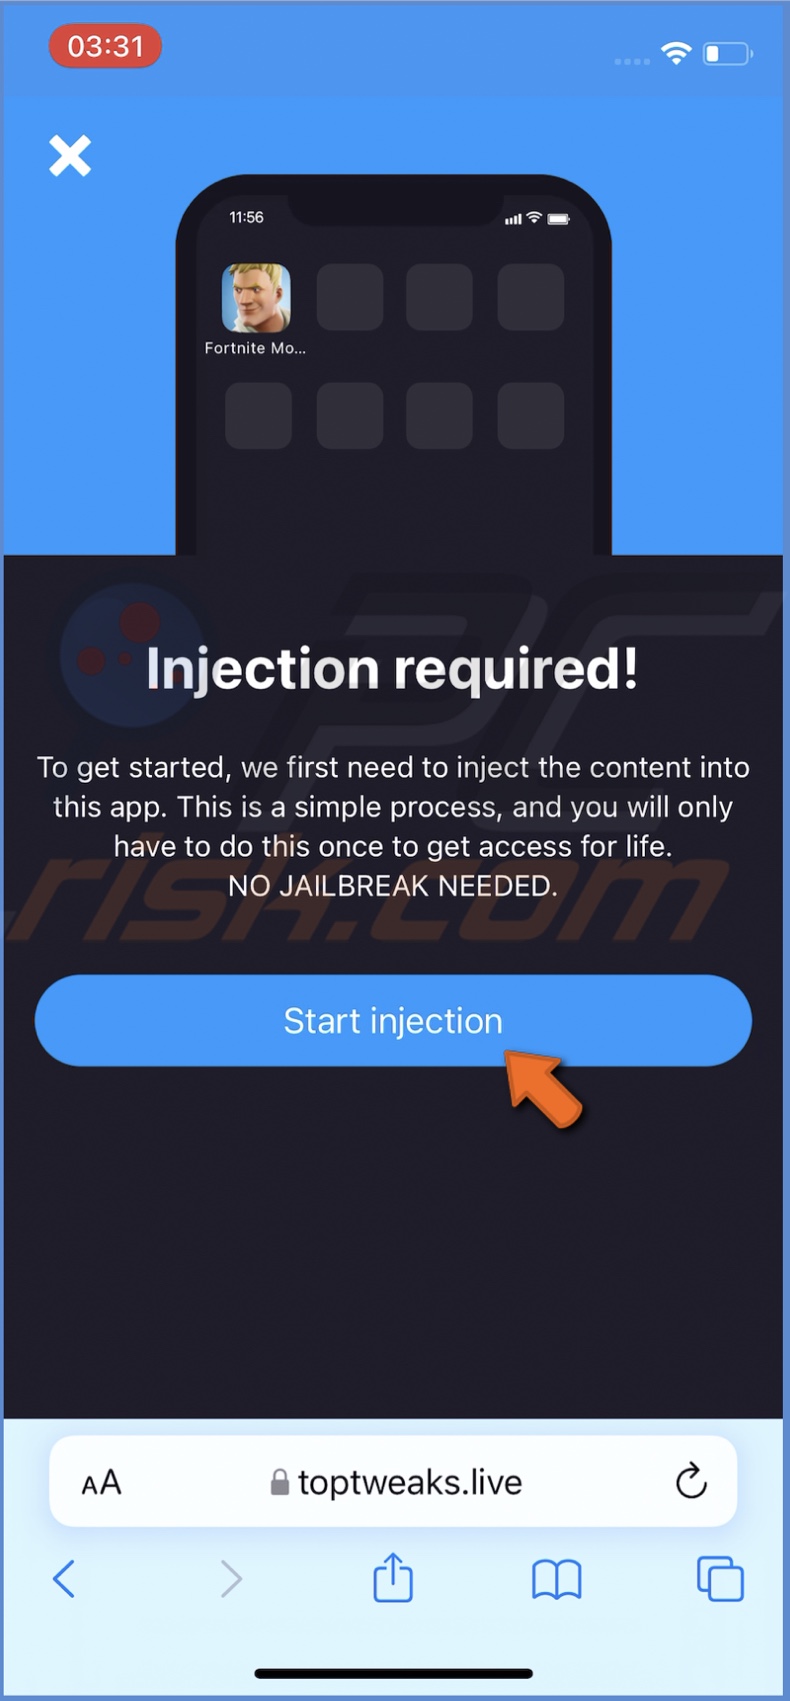 Tap on Start Injection